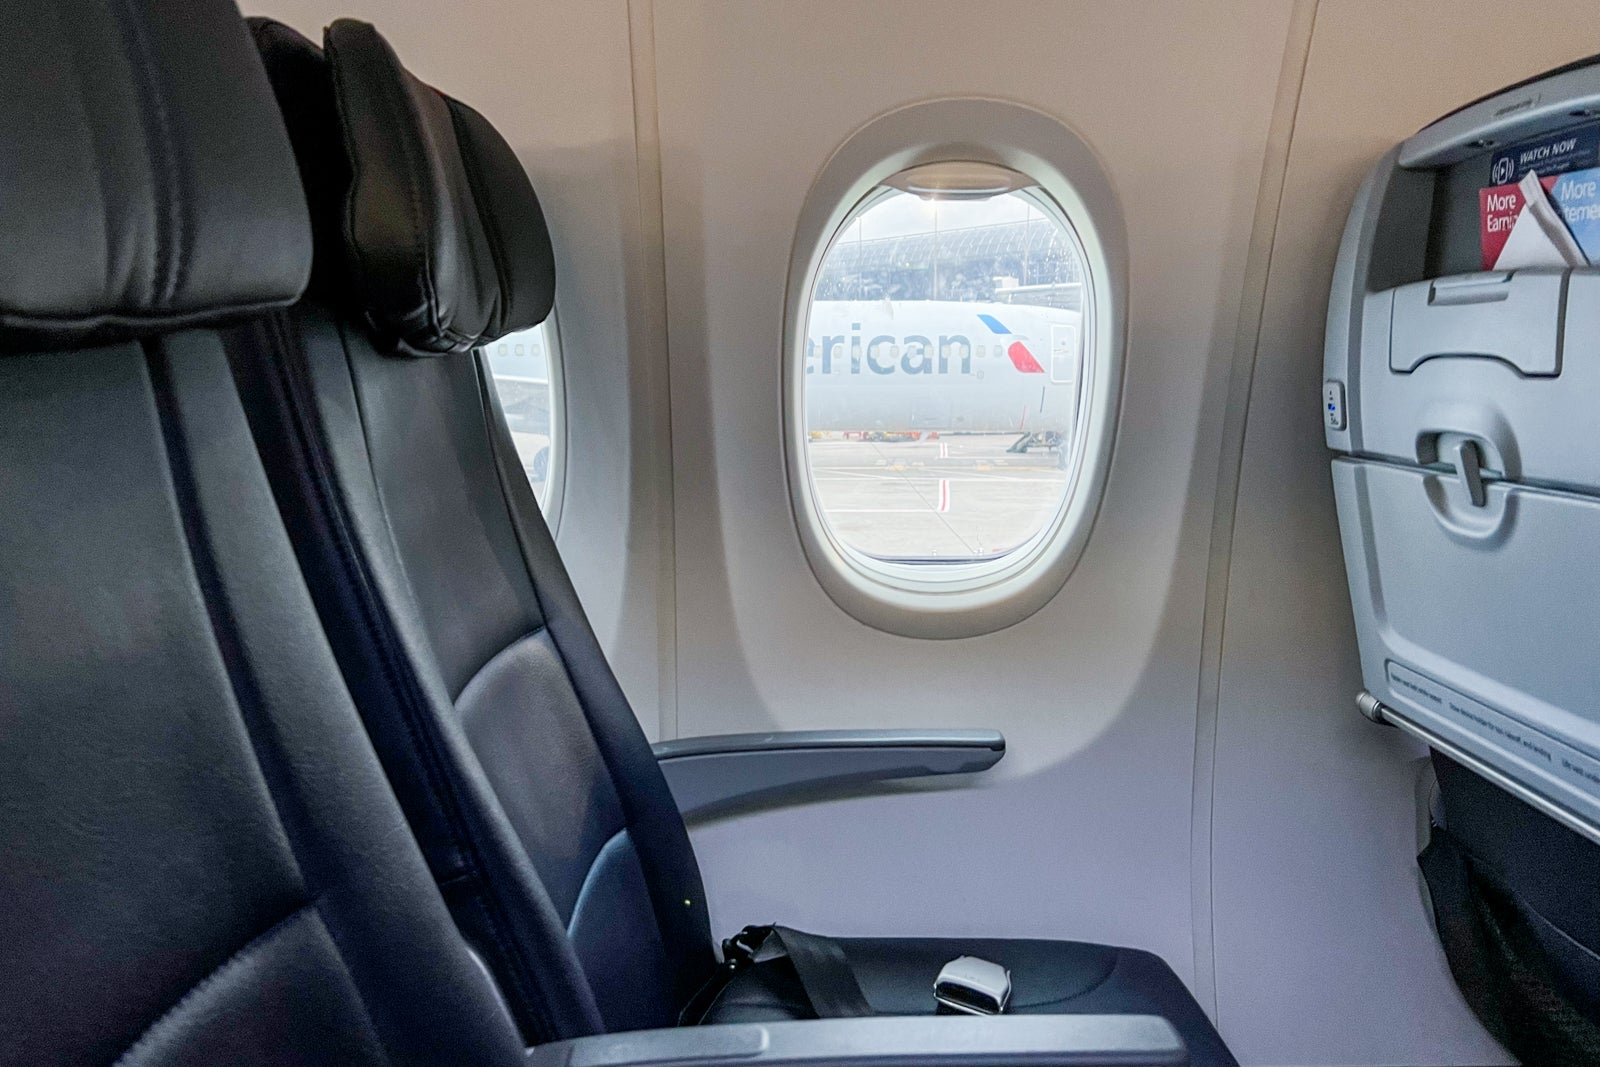 How to use ExpertFlyer alerts to snag a better seat